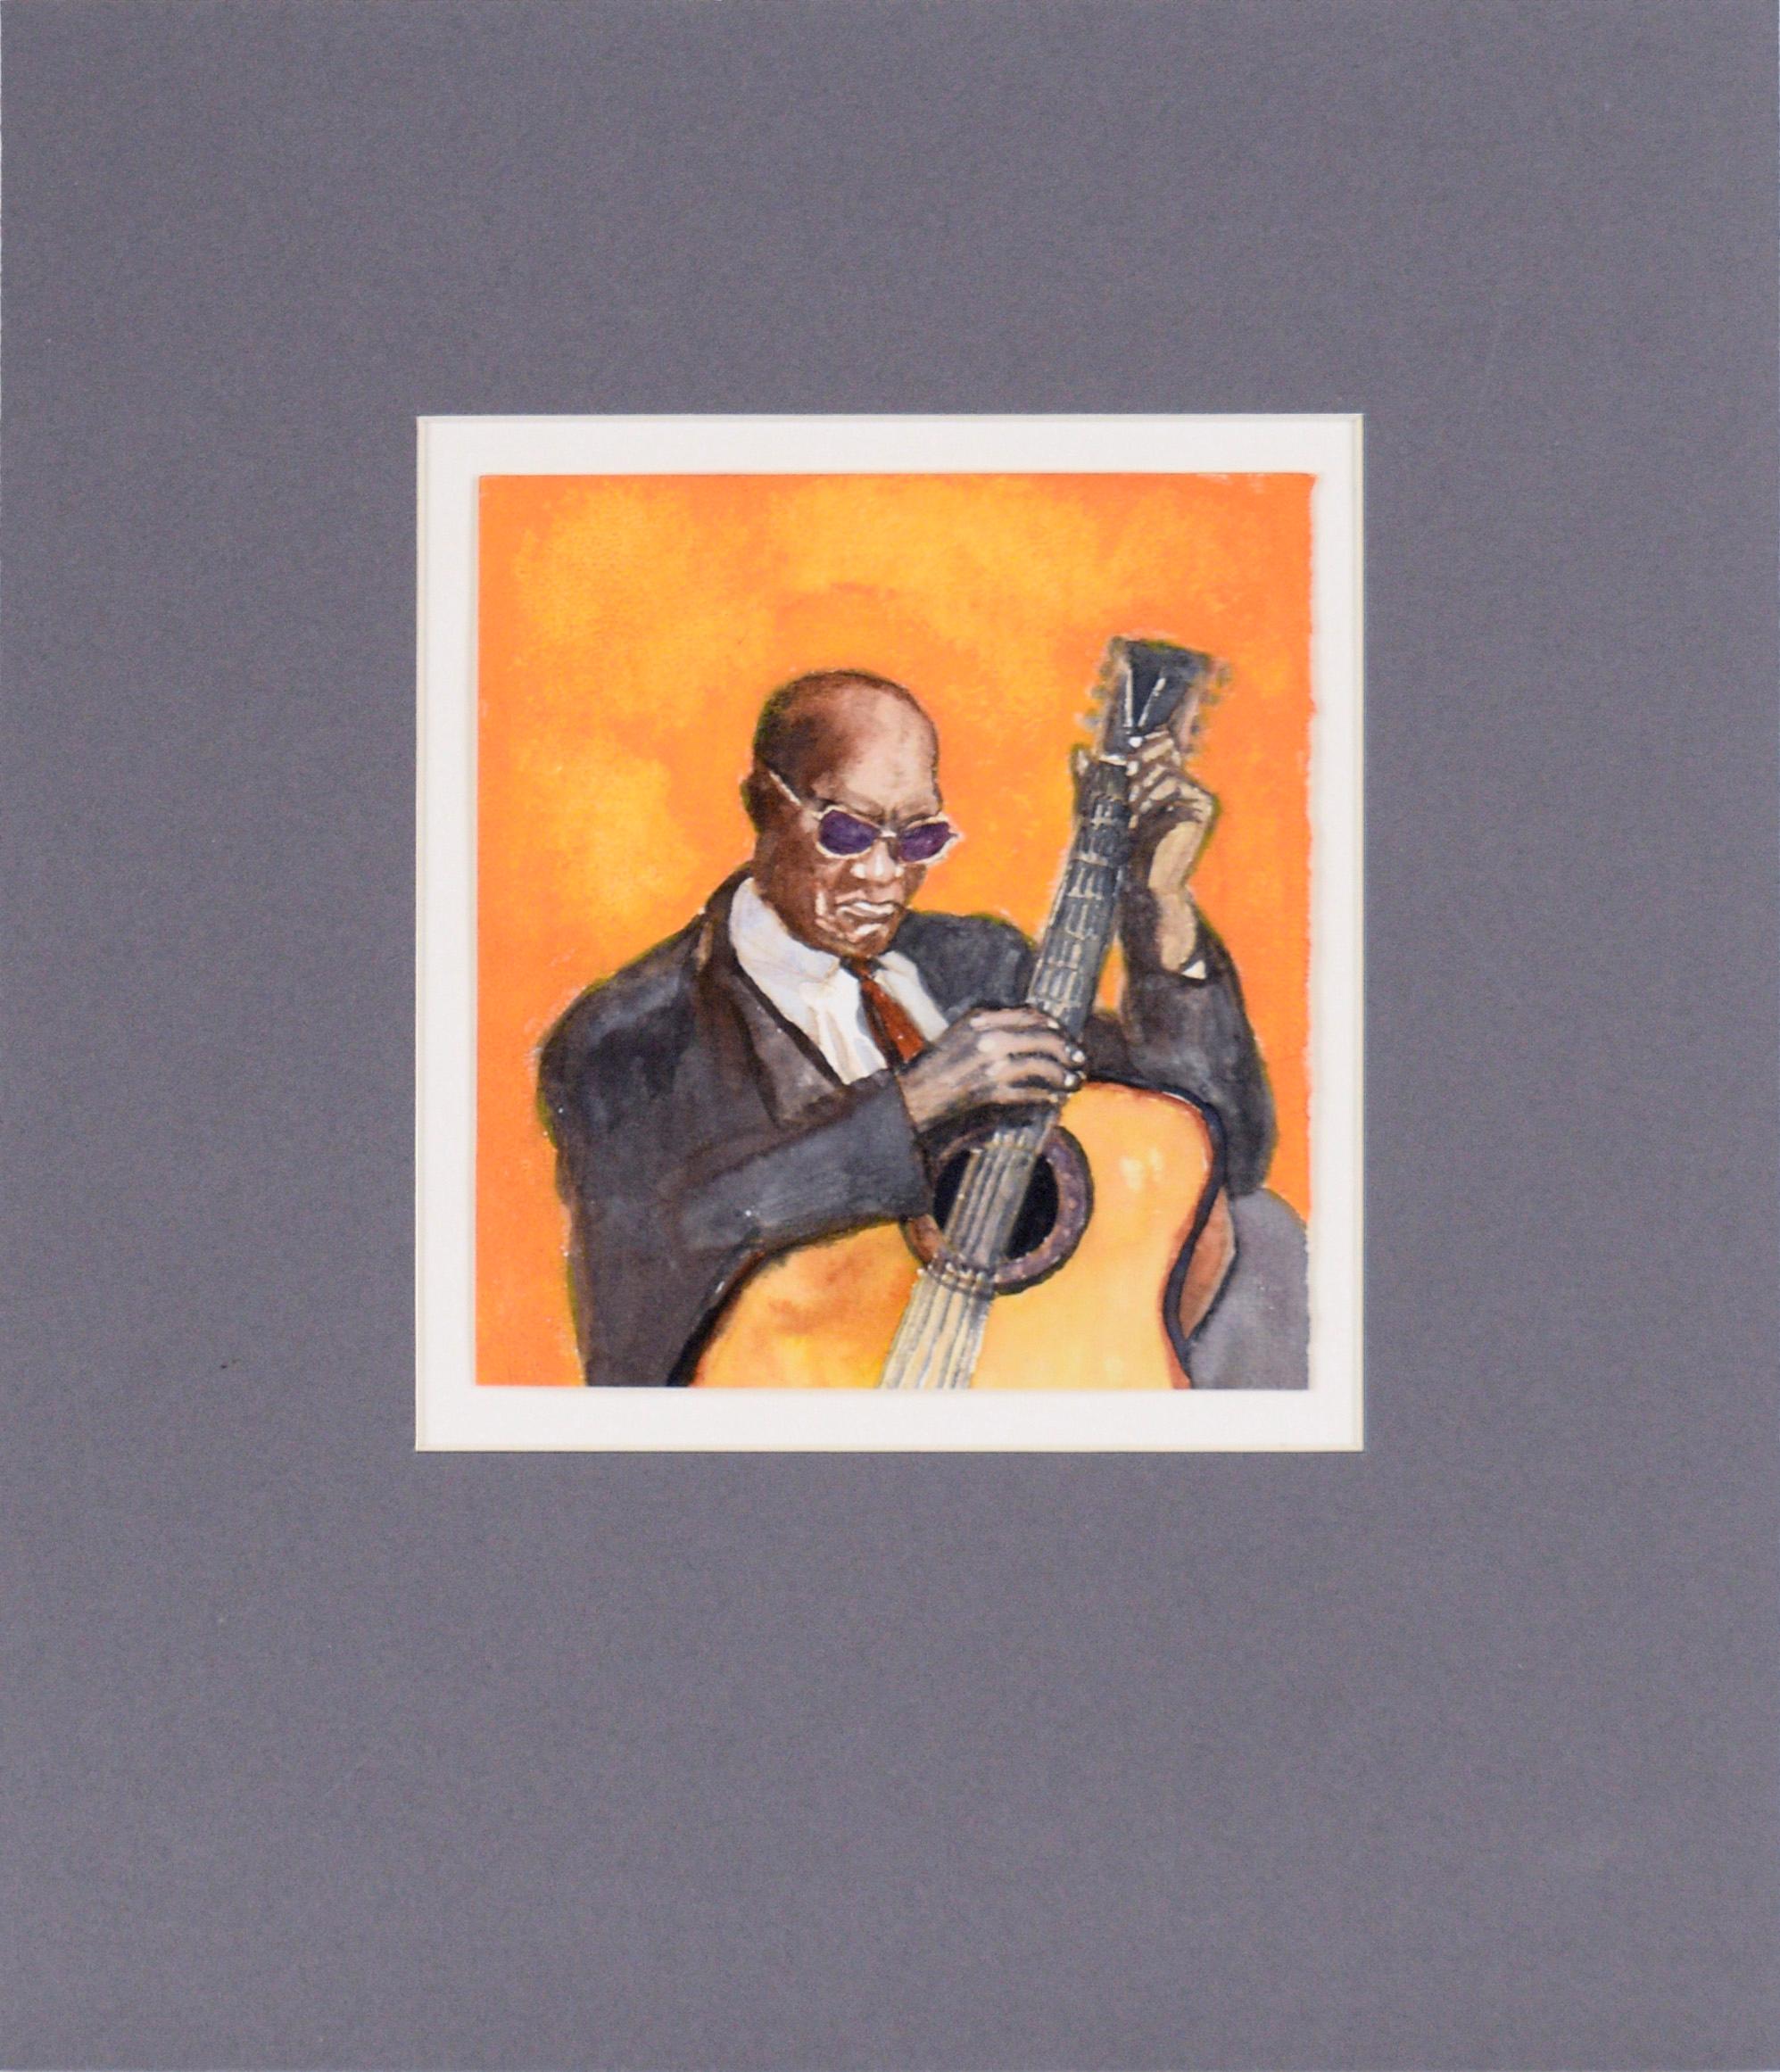 Brian Rounds Portrait - "Rev. Gary Davis" - Figurative Watercolor of a Guitar Player on Paper